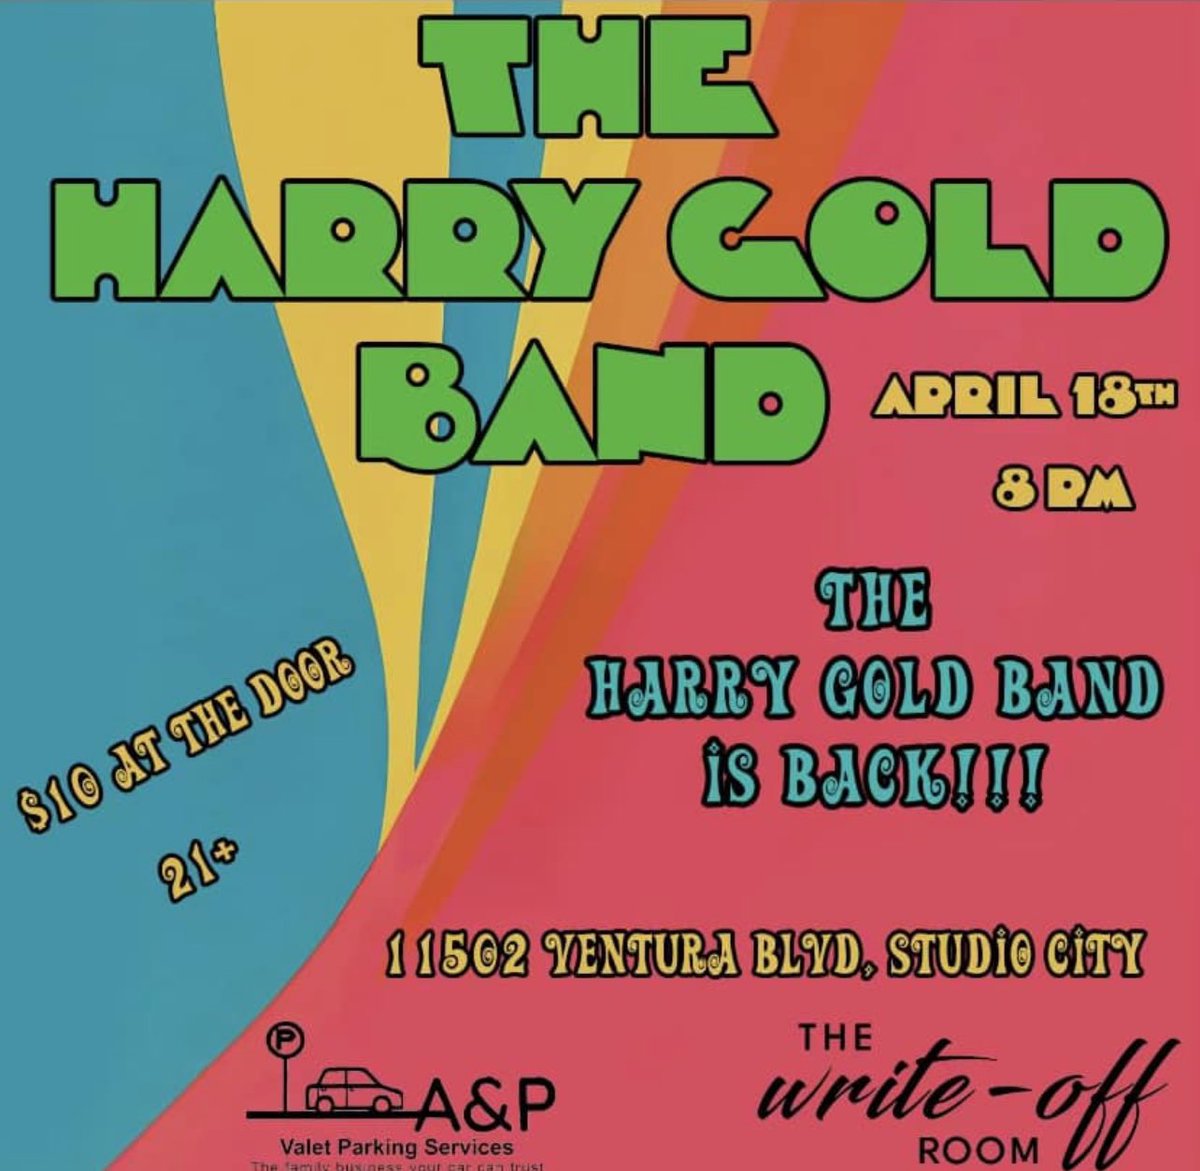 If you're in Los Angeles. All the best networking is going to be done at this show tonight. Harry Gold is performing!!!!